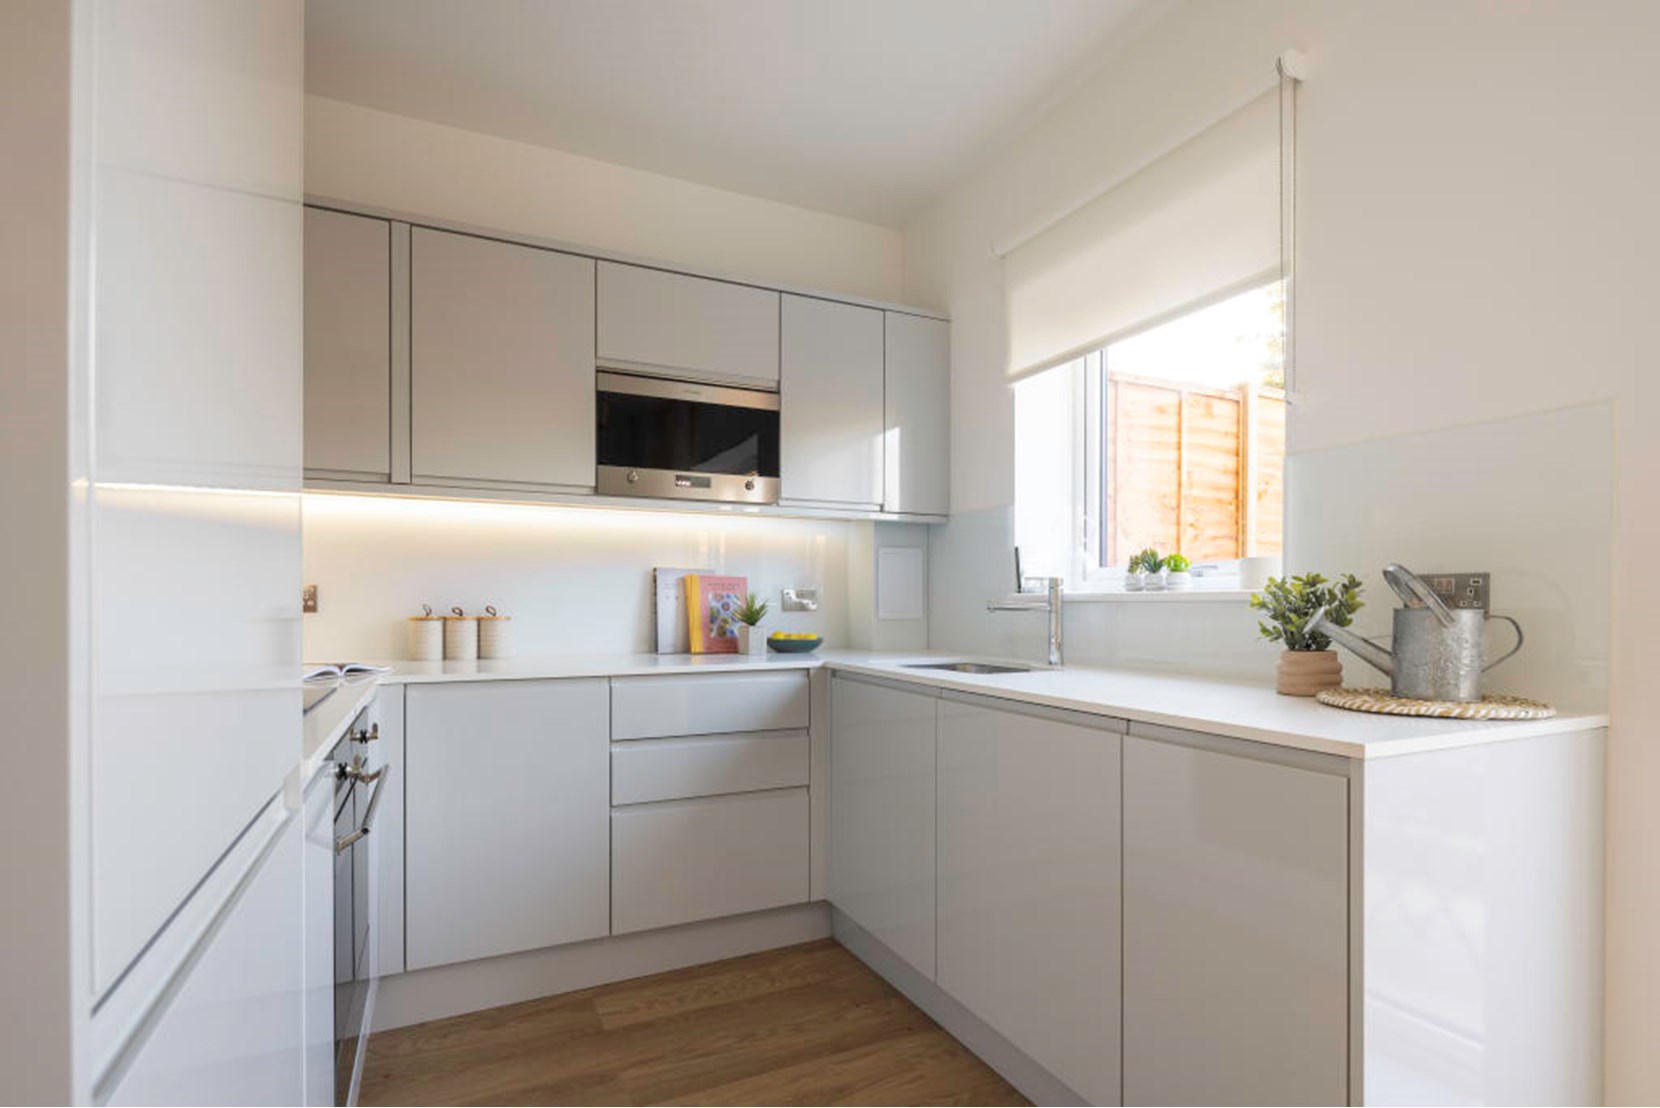 Apartments and houses to Rent by Heimstanden at Soho Wharf, Birmingham, B18, kitchen